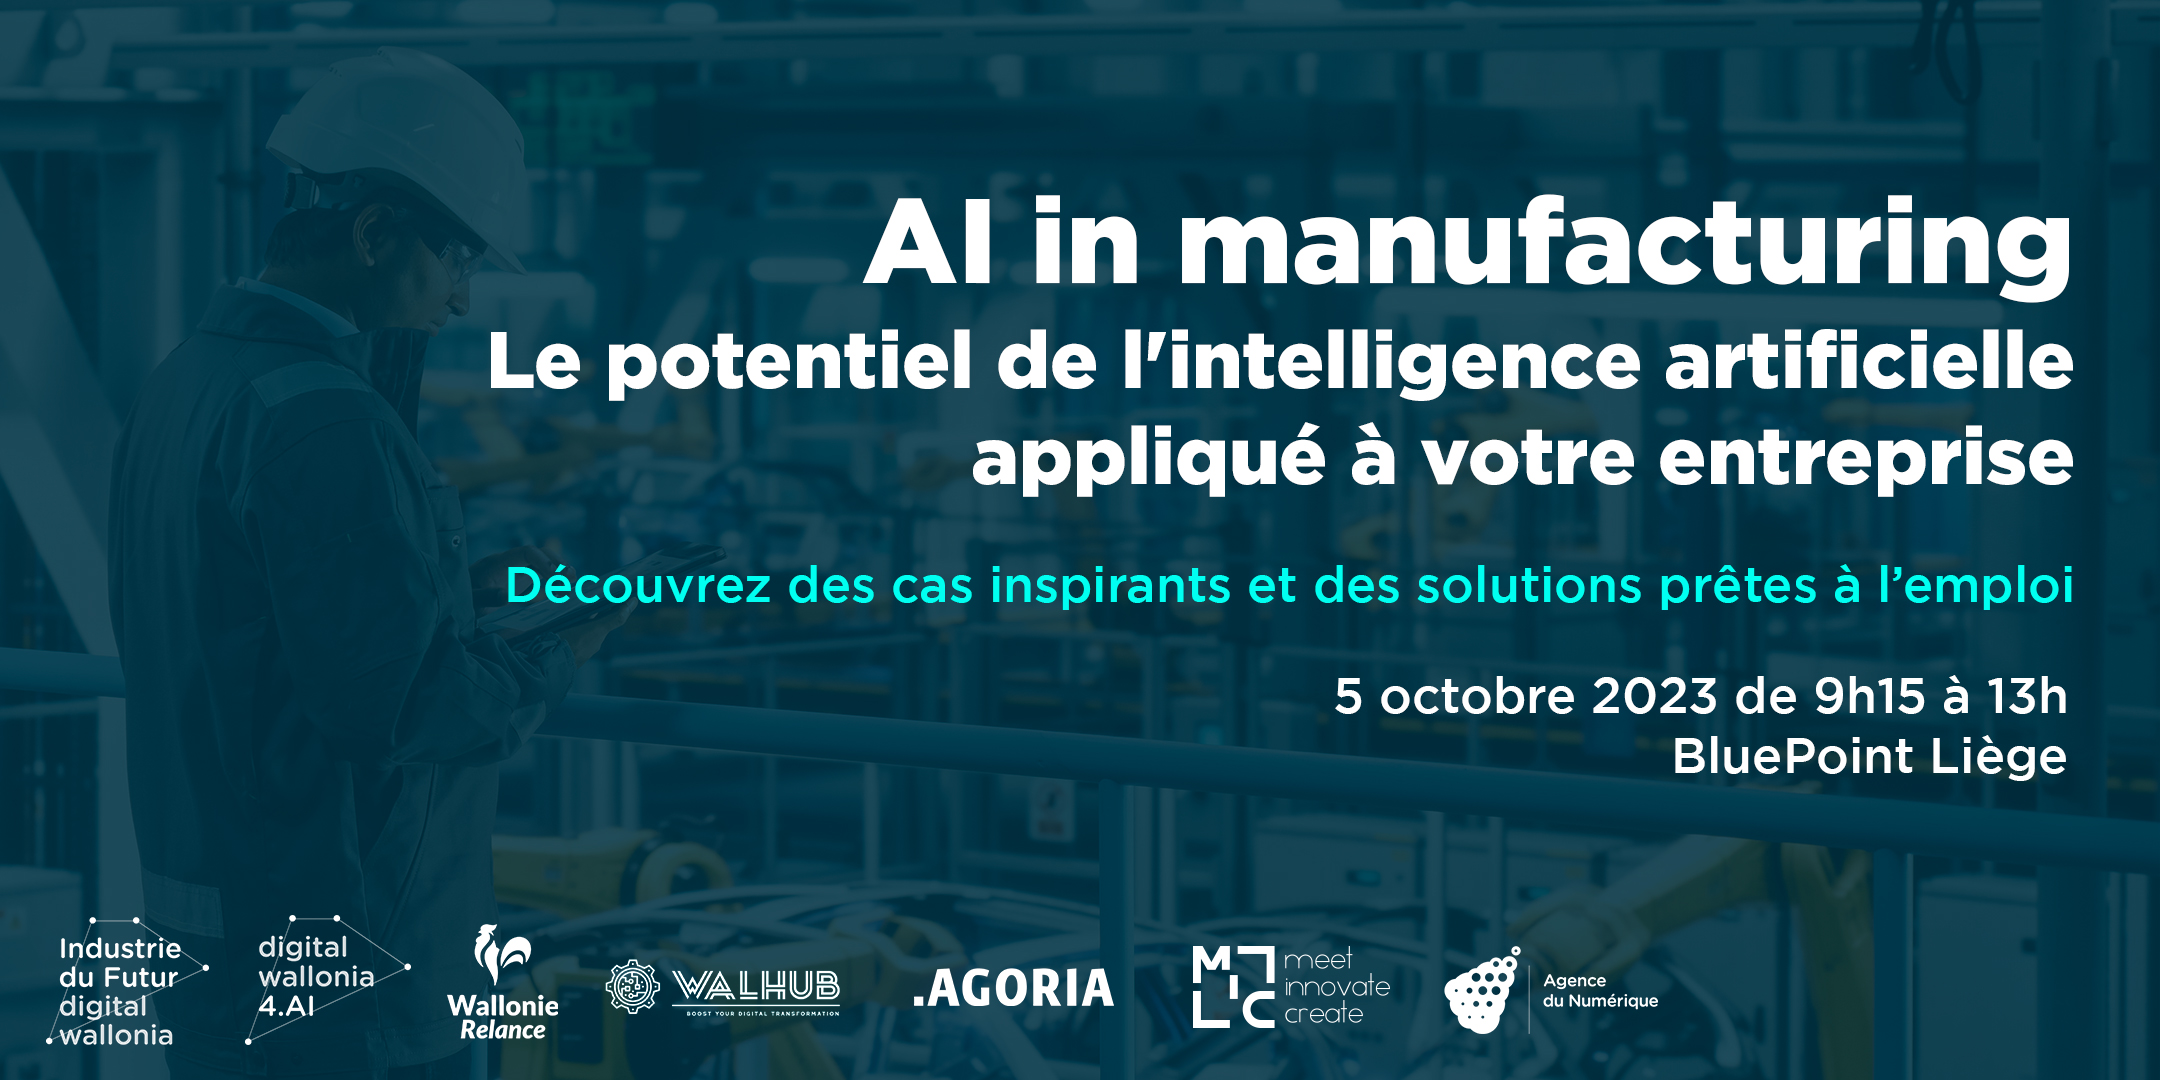 AI in manufacturing : the potential of artificial intelligence applied to your business